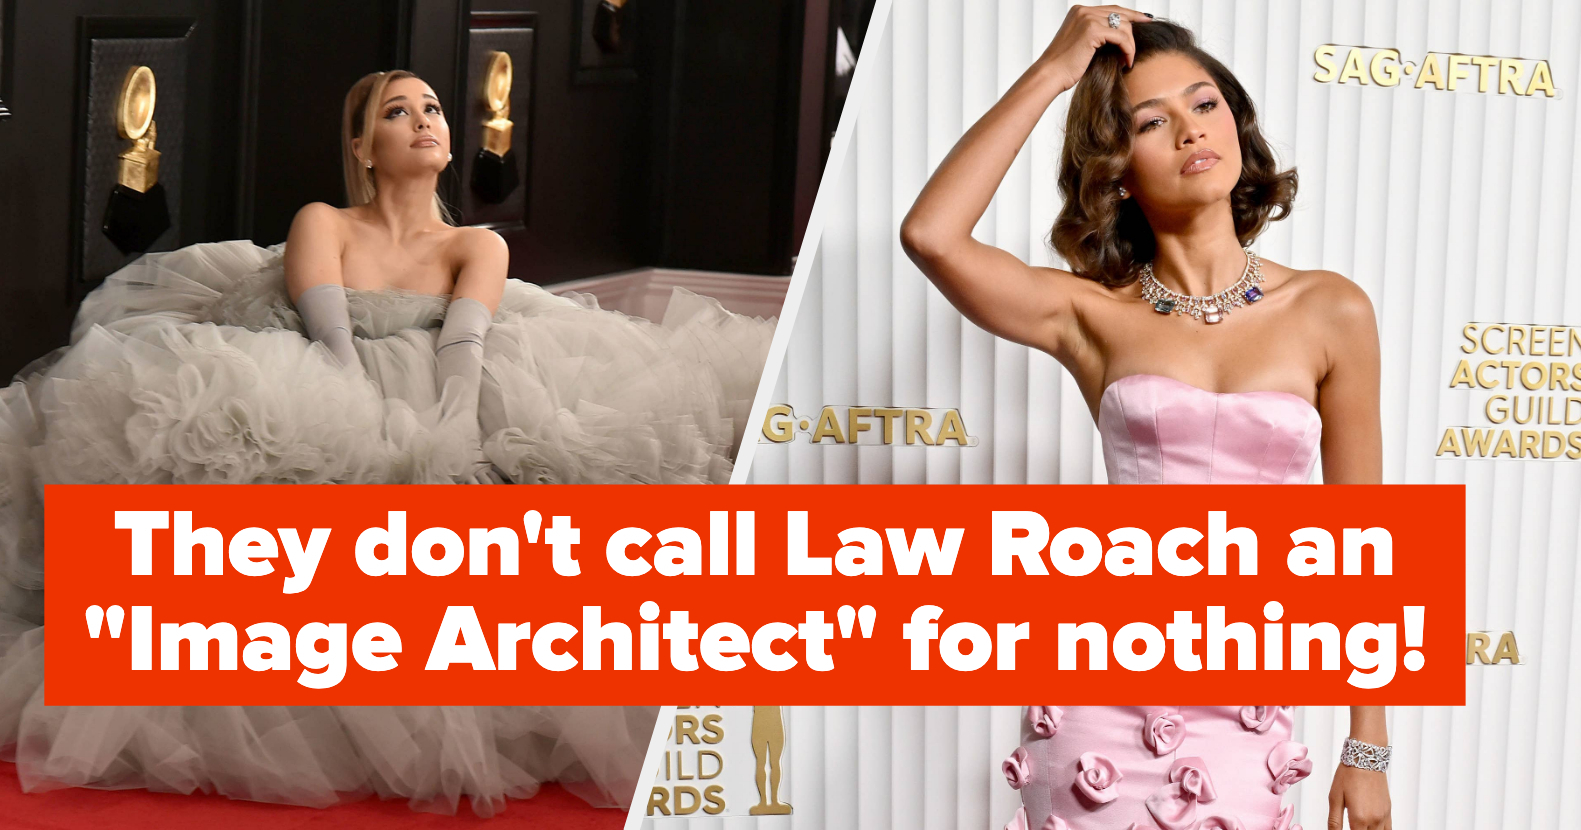 Law Roach's Most Iconic Looks Worn by Zendaya, Lindsay Lohan, and Other